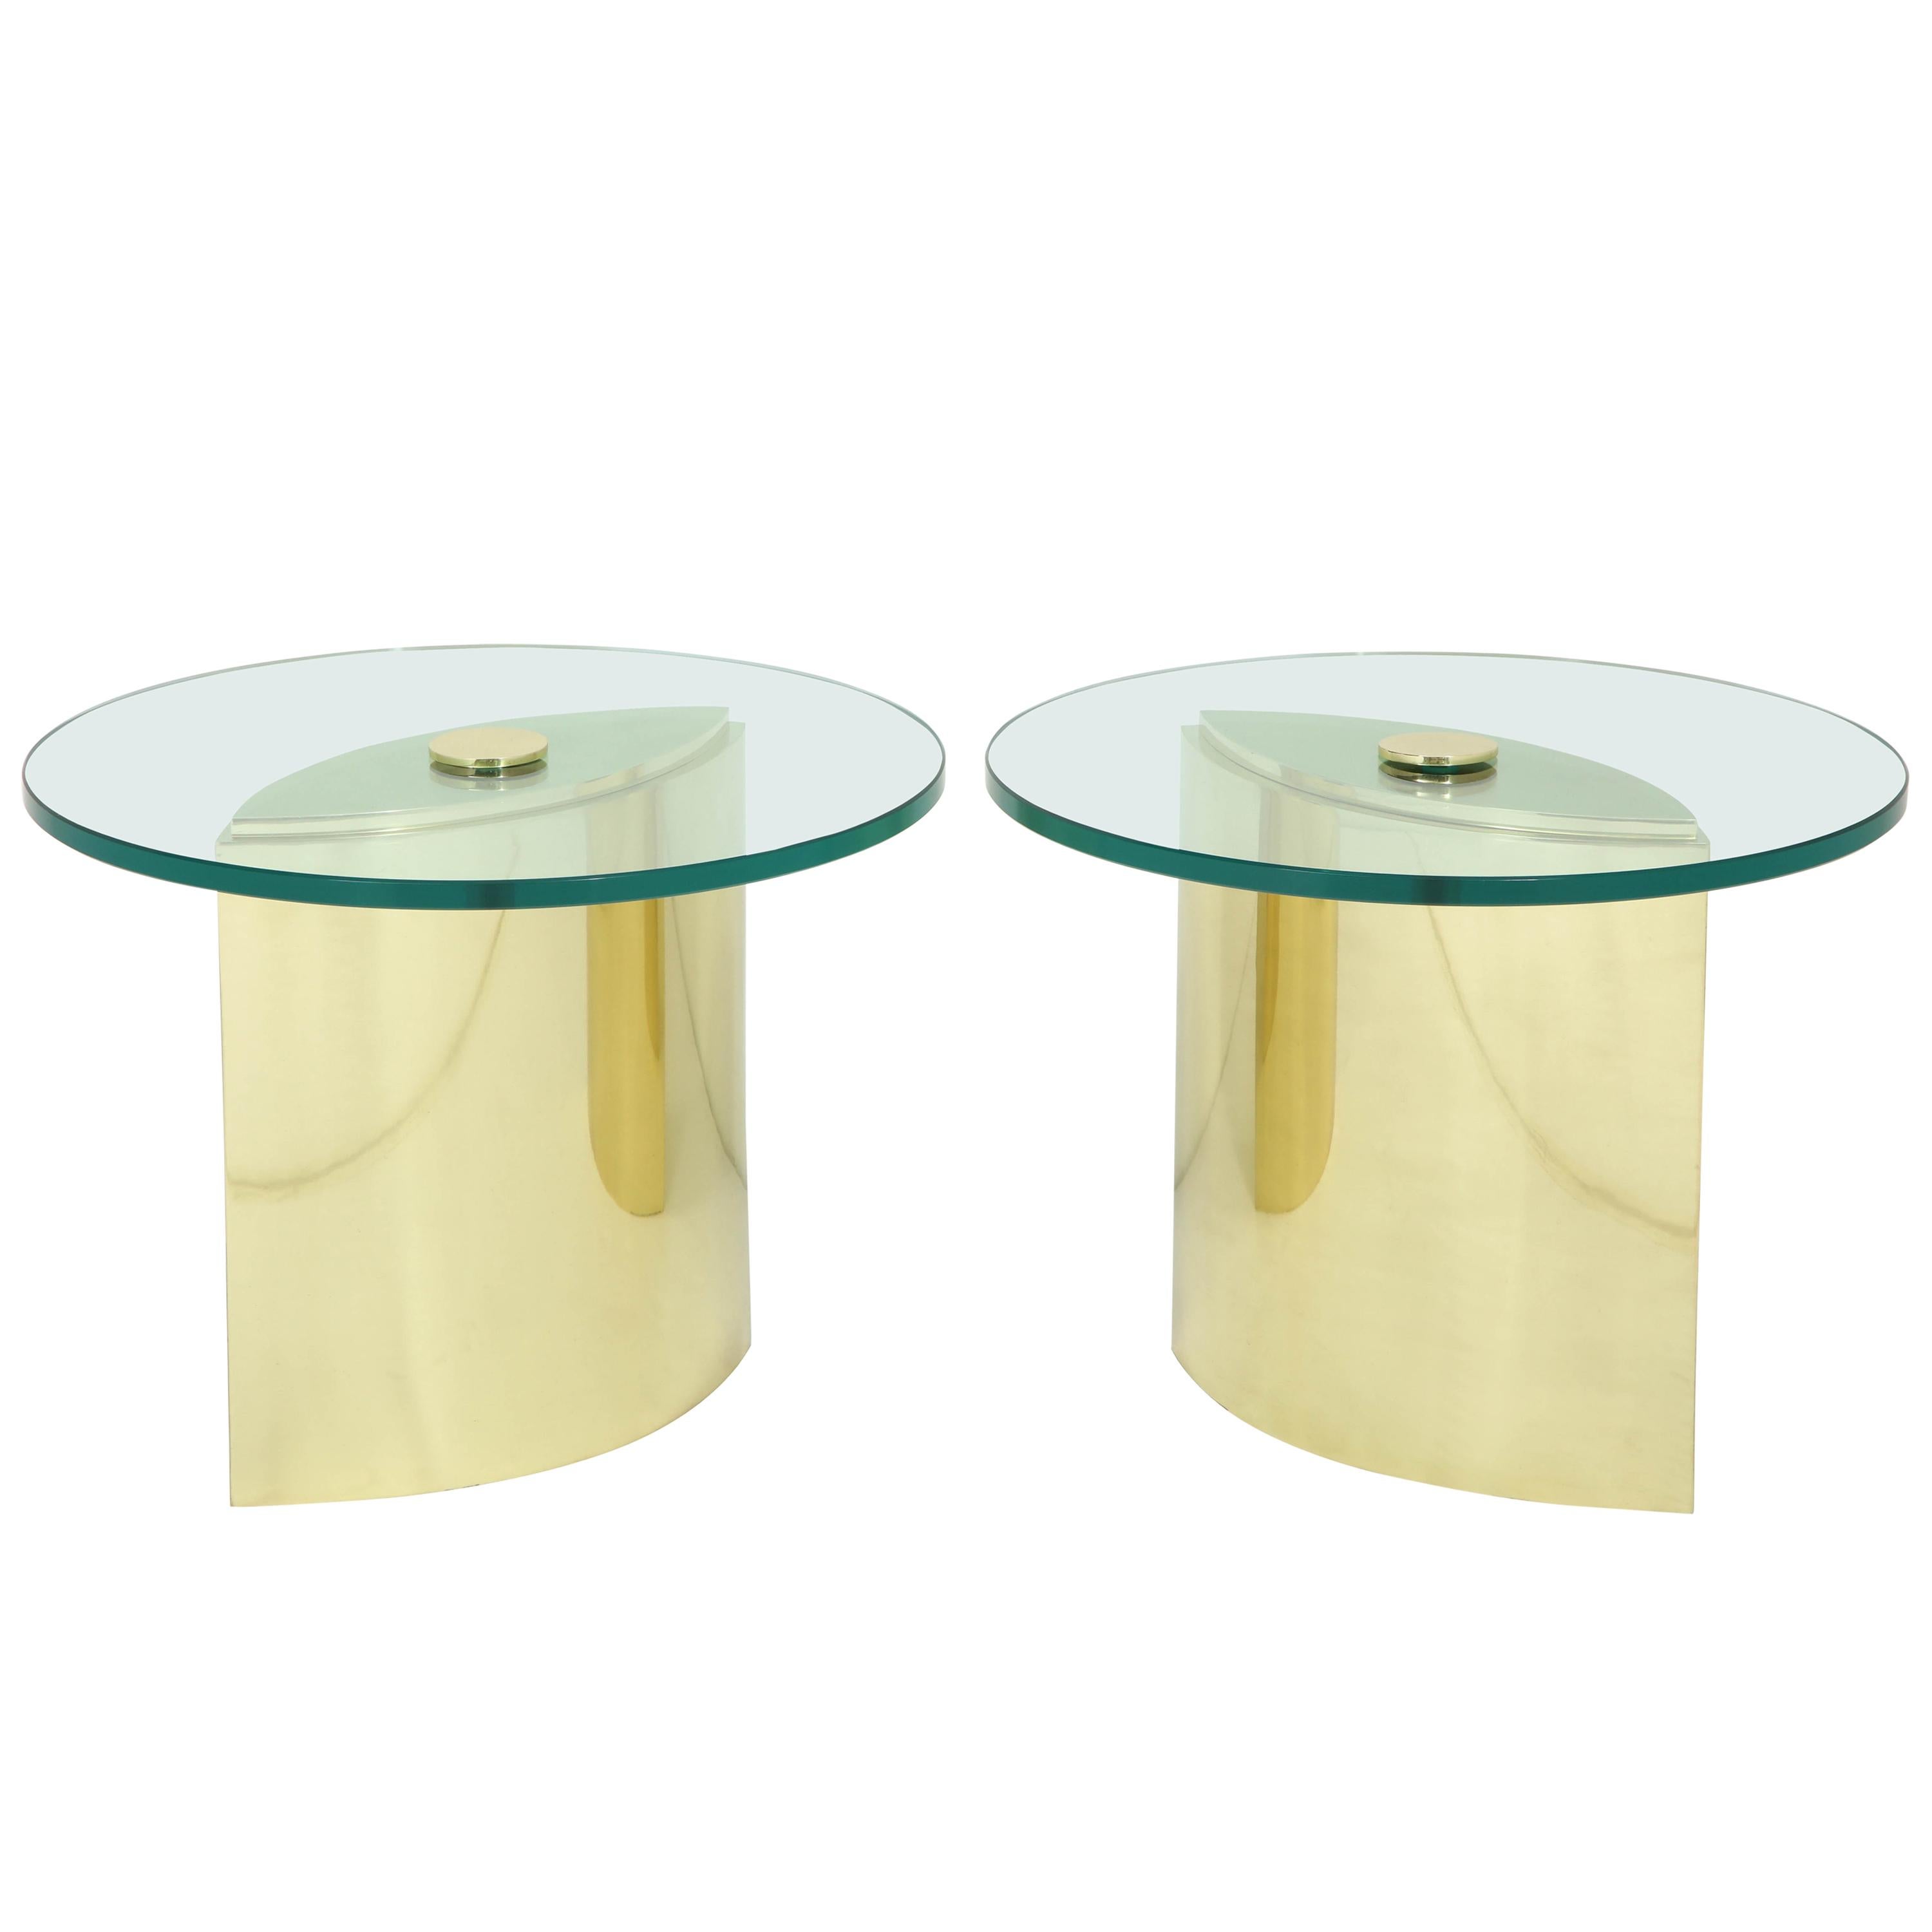 Pair of Brass "Eye" Tables by Steve Chase